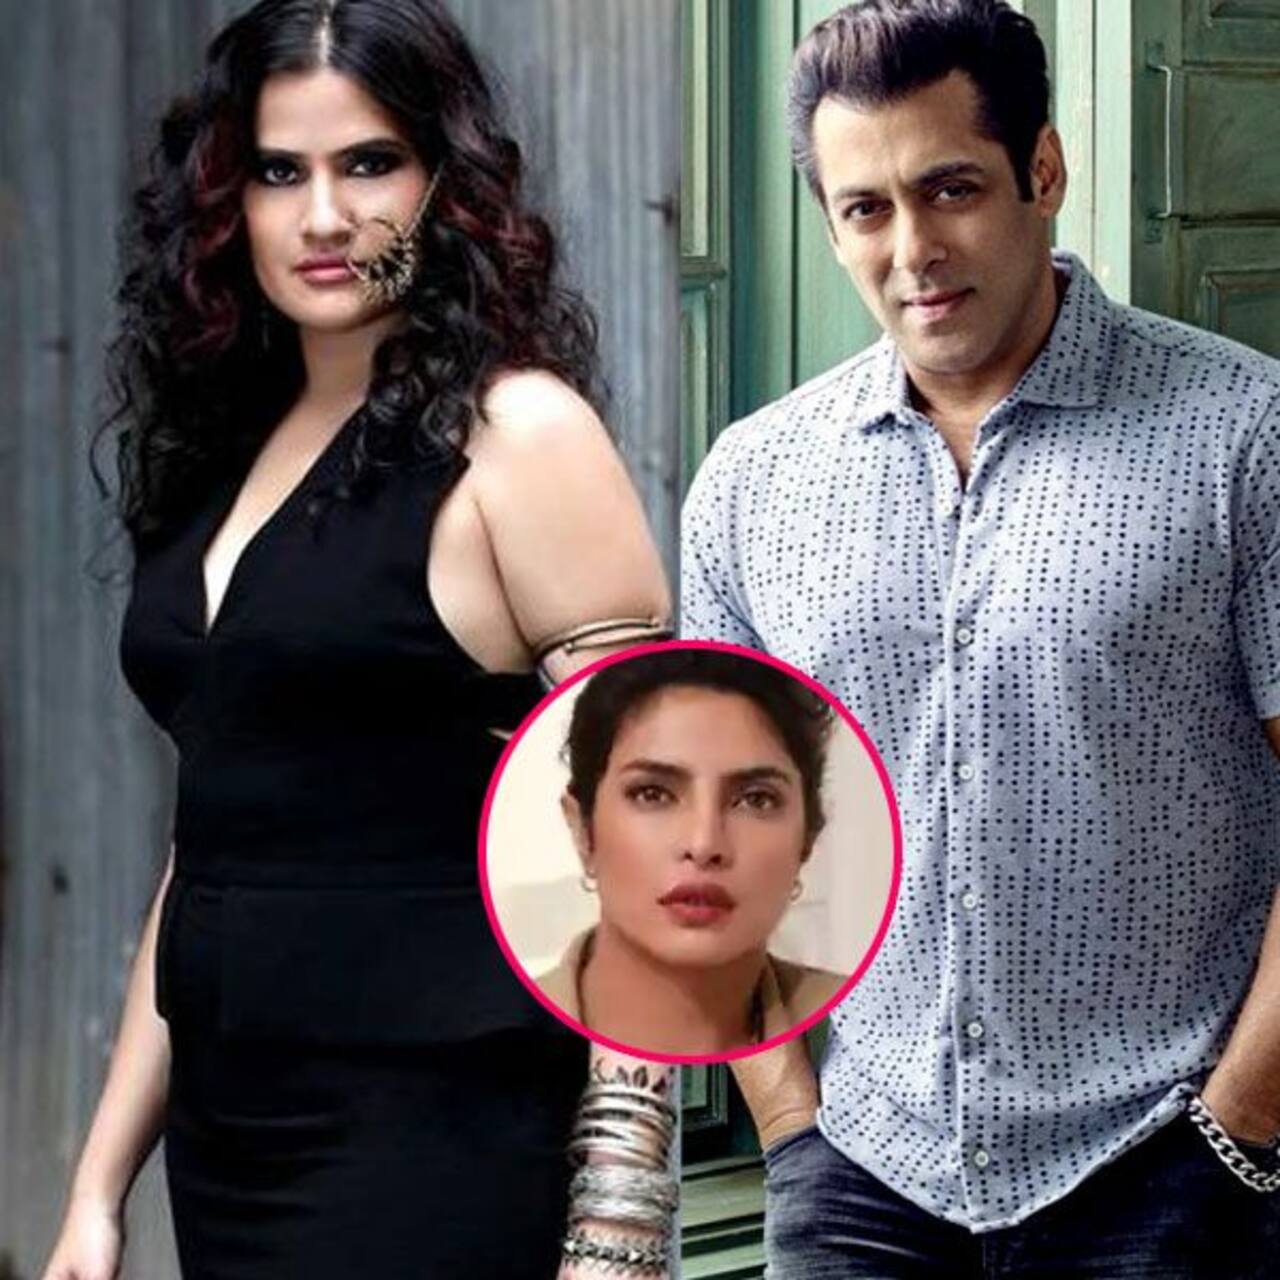 Sona Mohapatra gives a sarcastic reply to a fan who pointed out she was quick to slam Salman Khan but refused to credit him when Priyanka Chopra spoke of his kind gesture